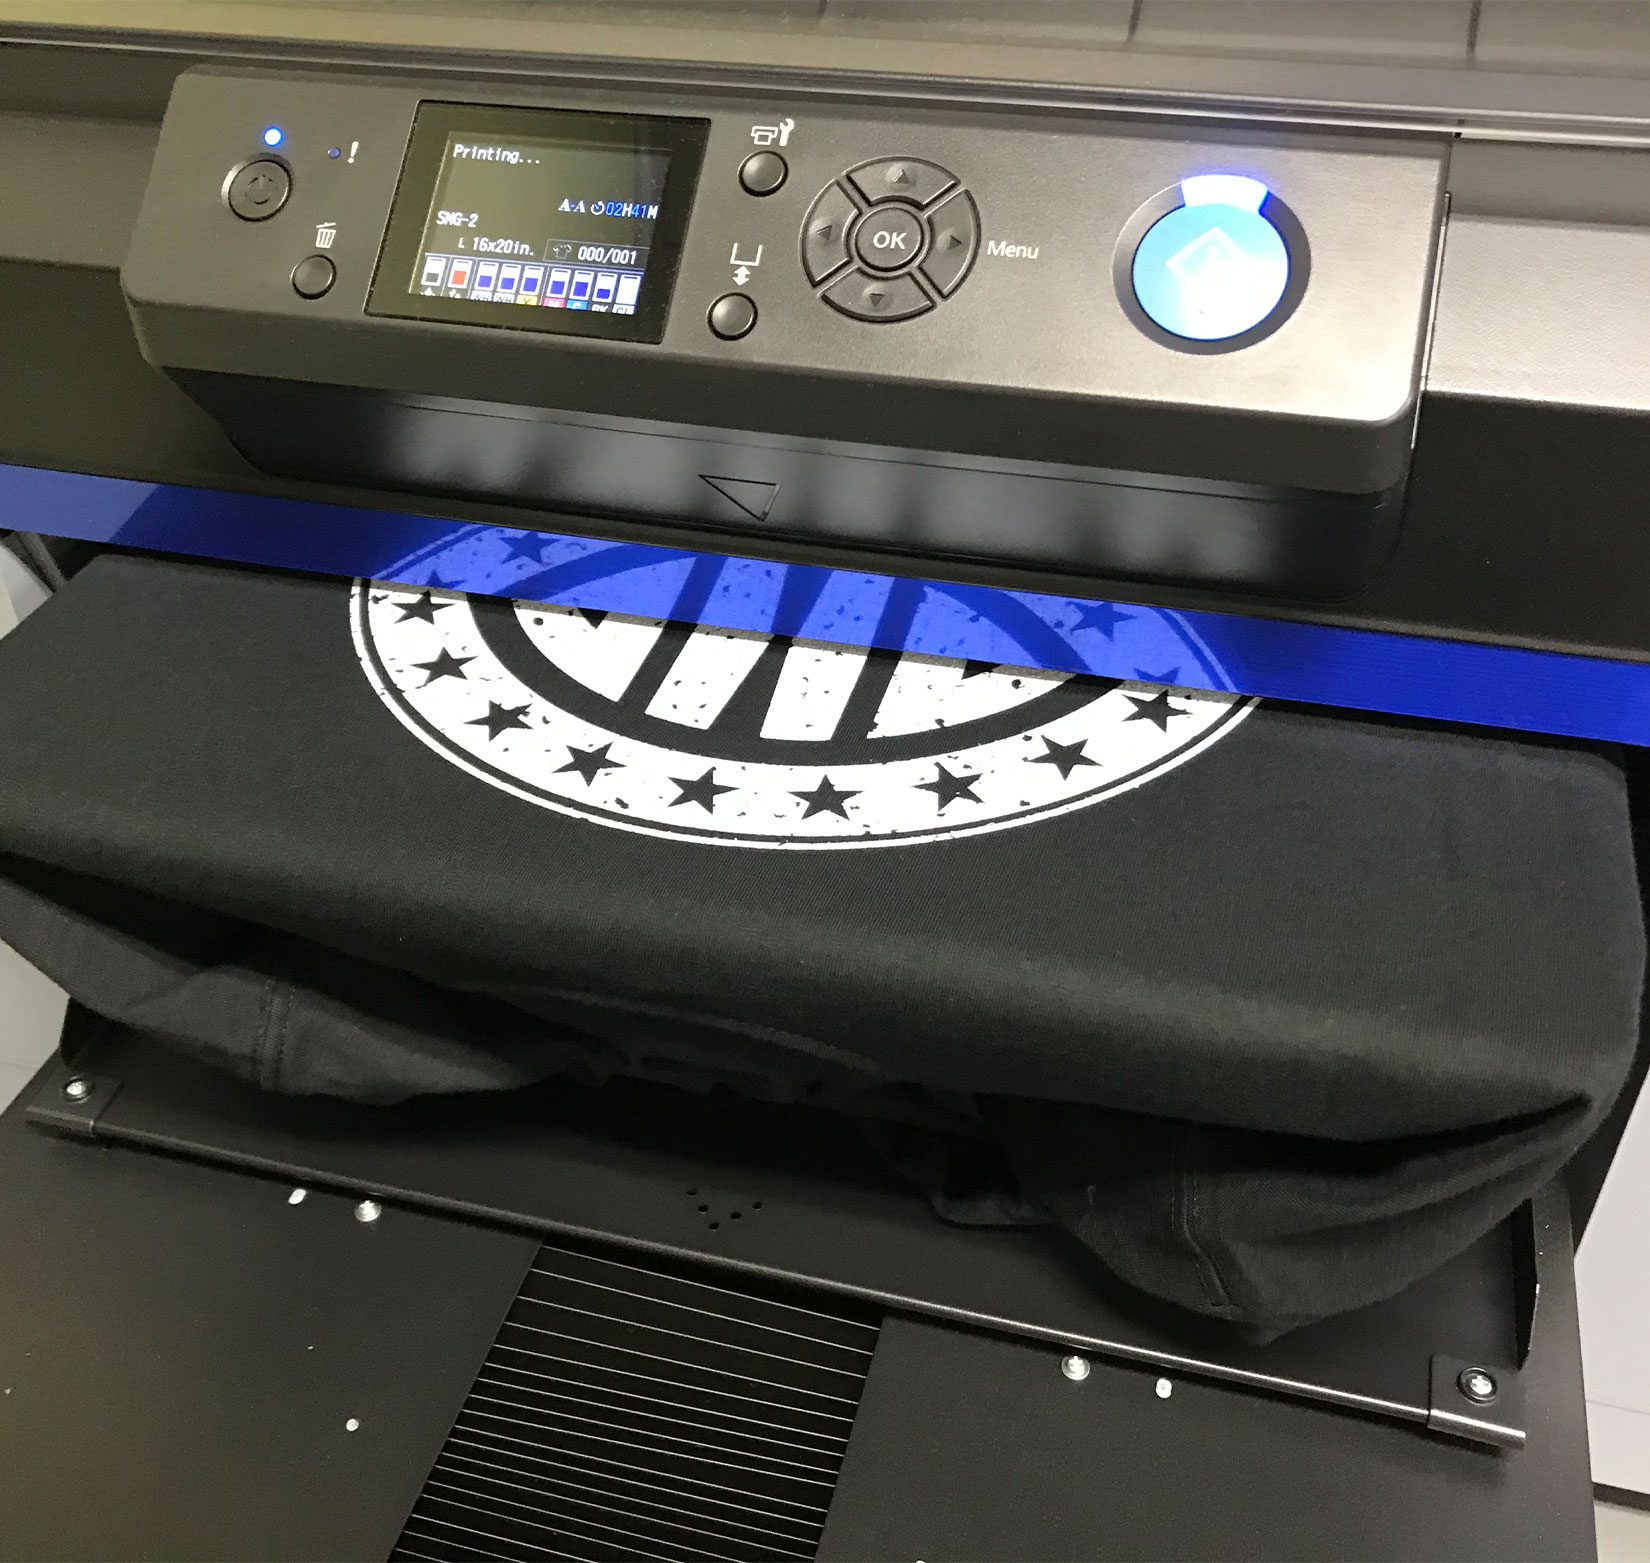 A black t-shirt emerging out of a screen printer